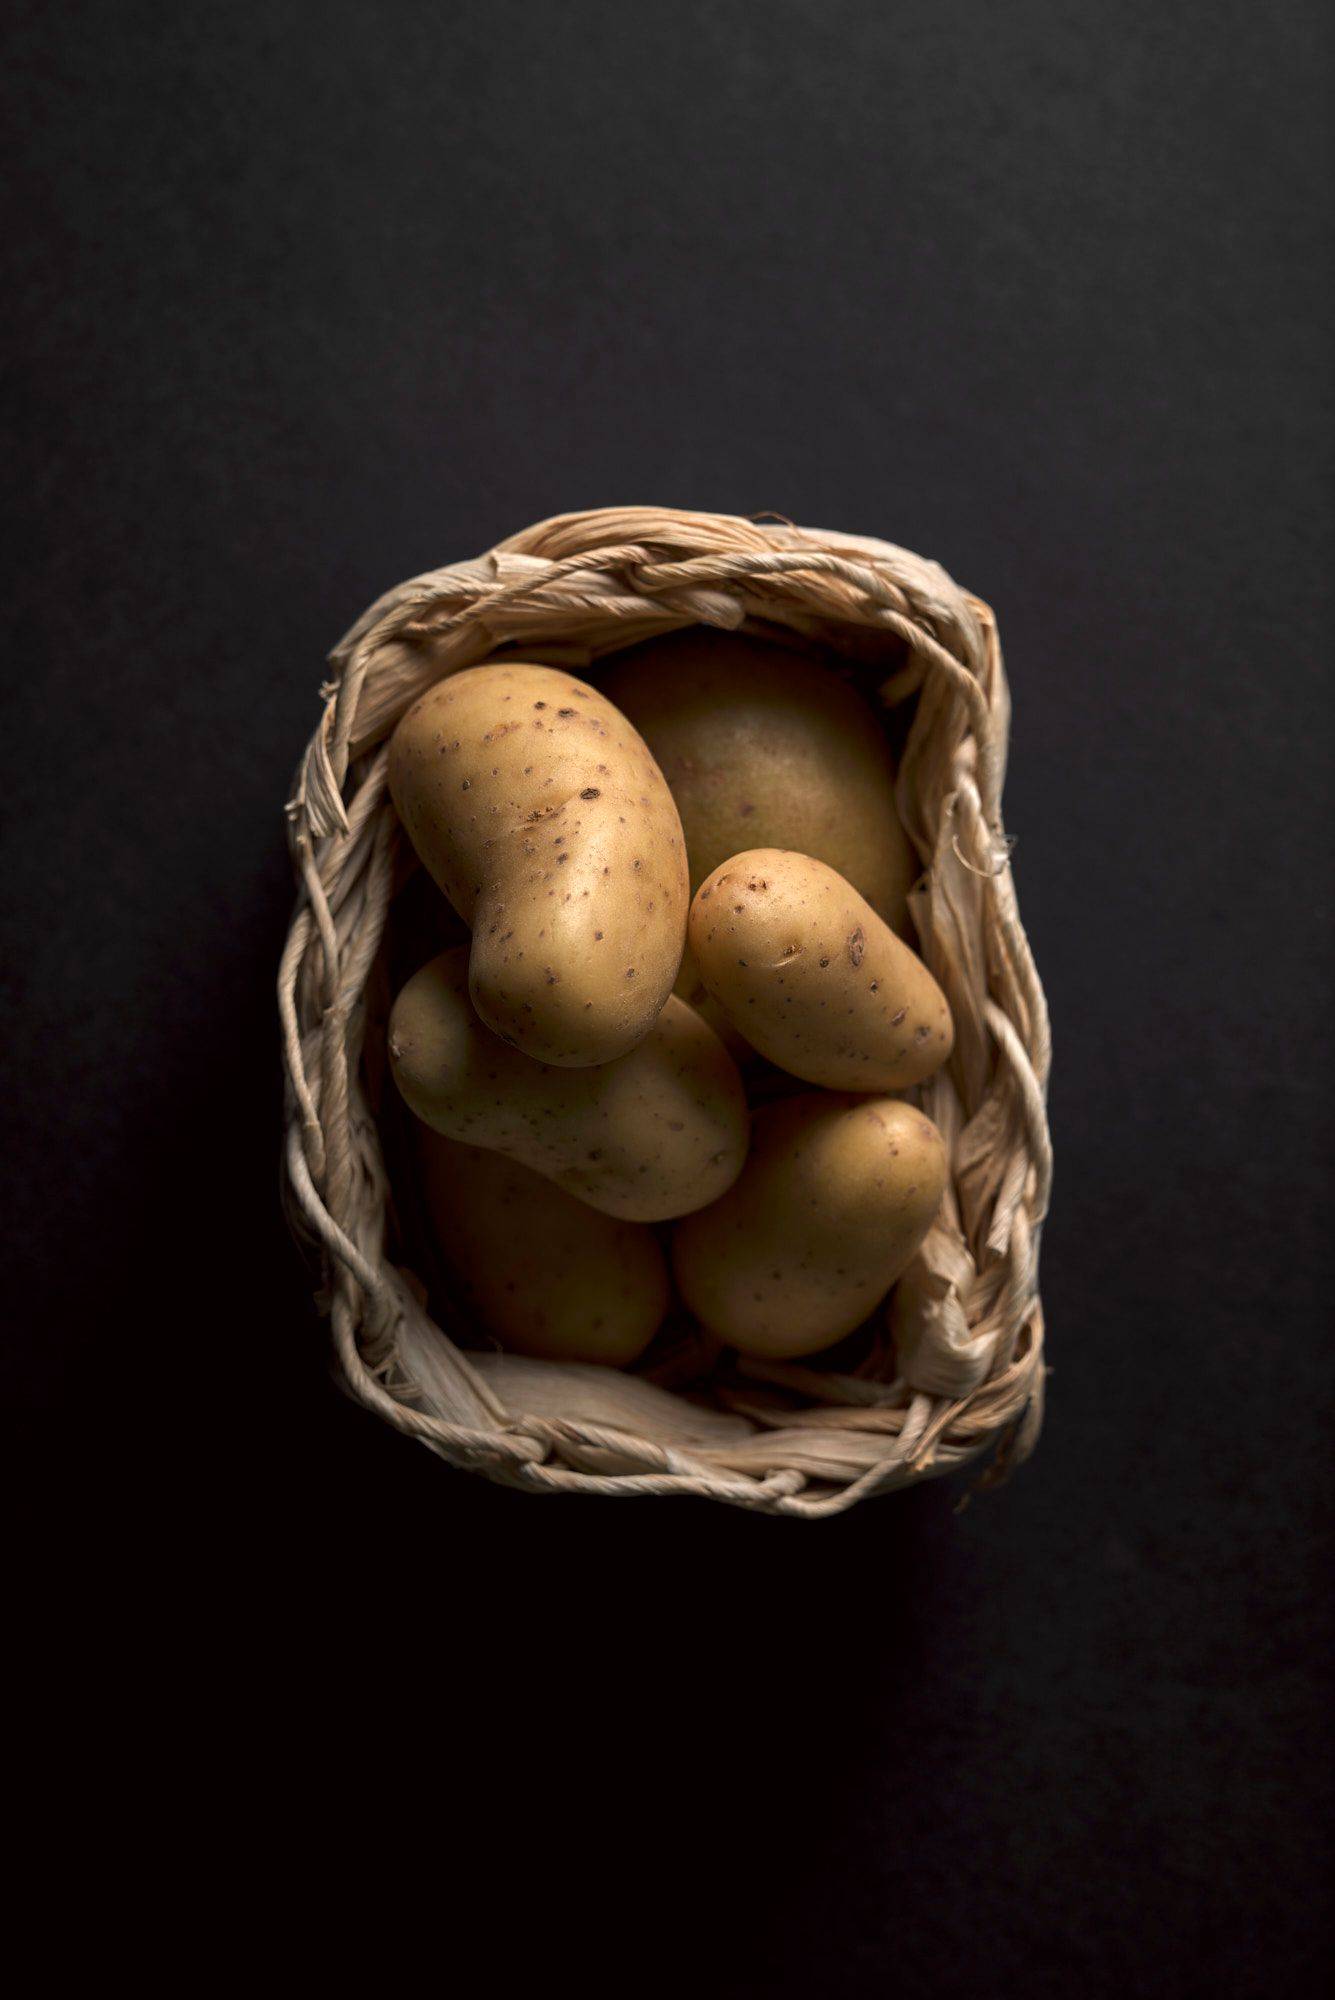 potatoes in a small basket on black background